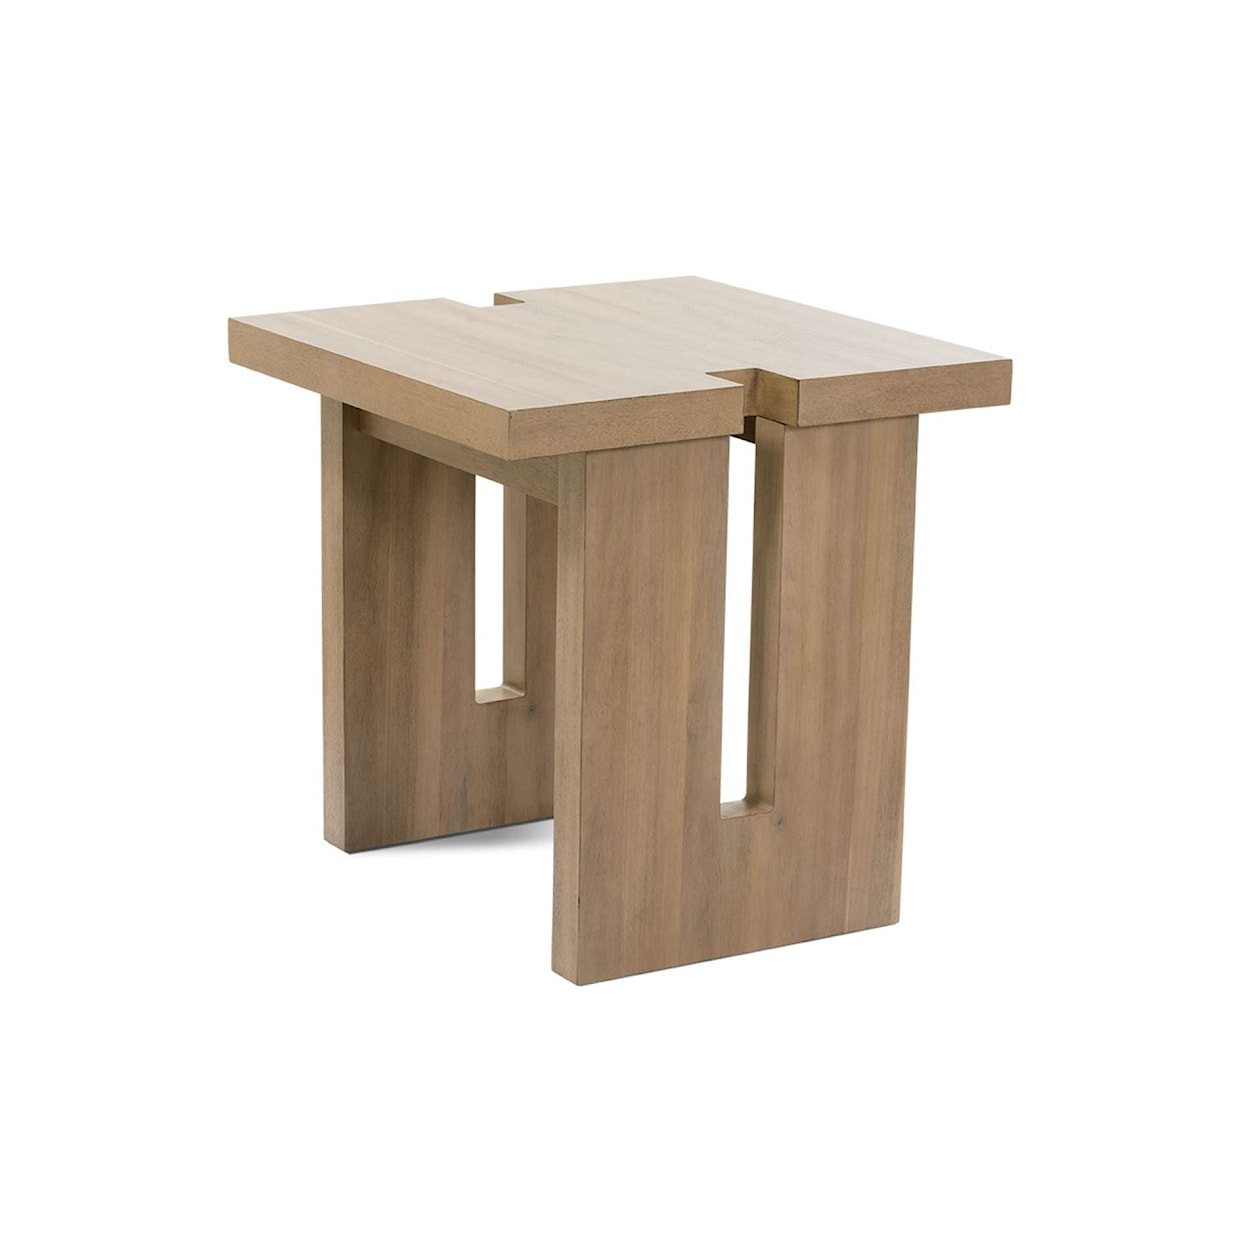 Rowe Theory End Table